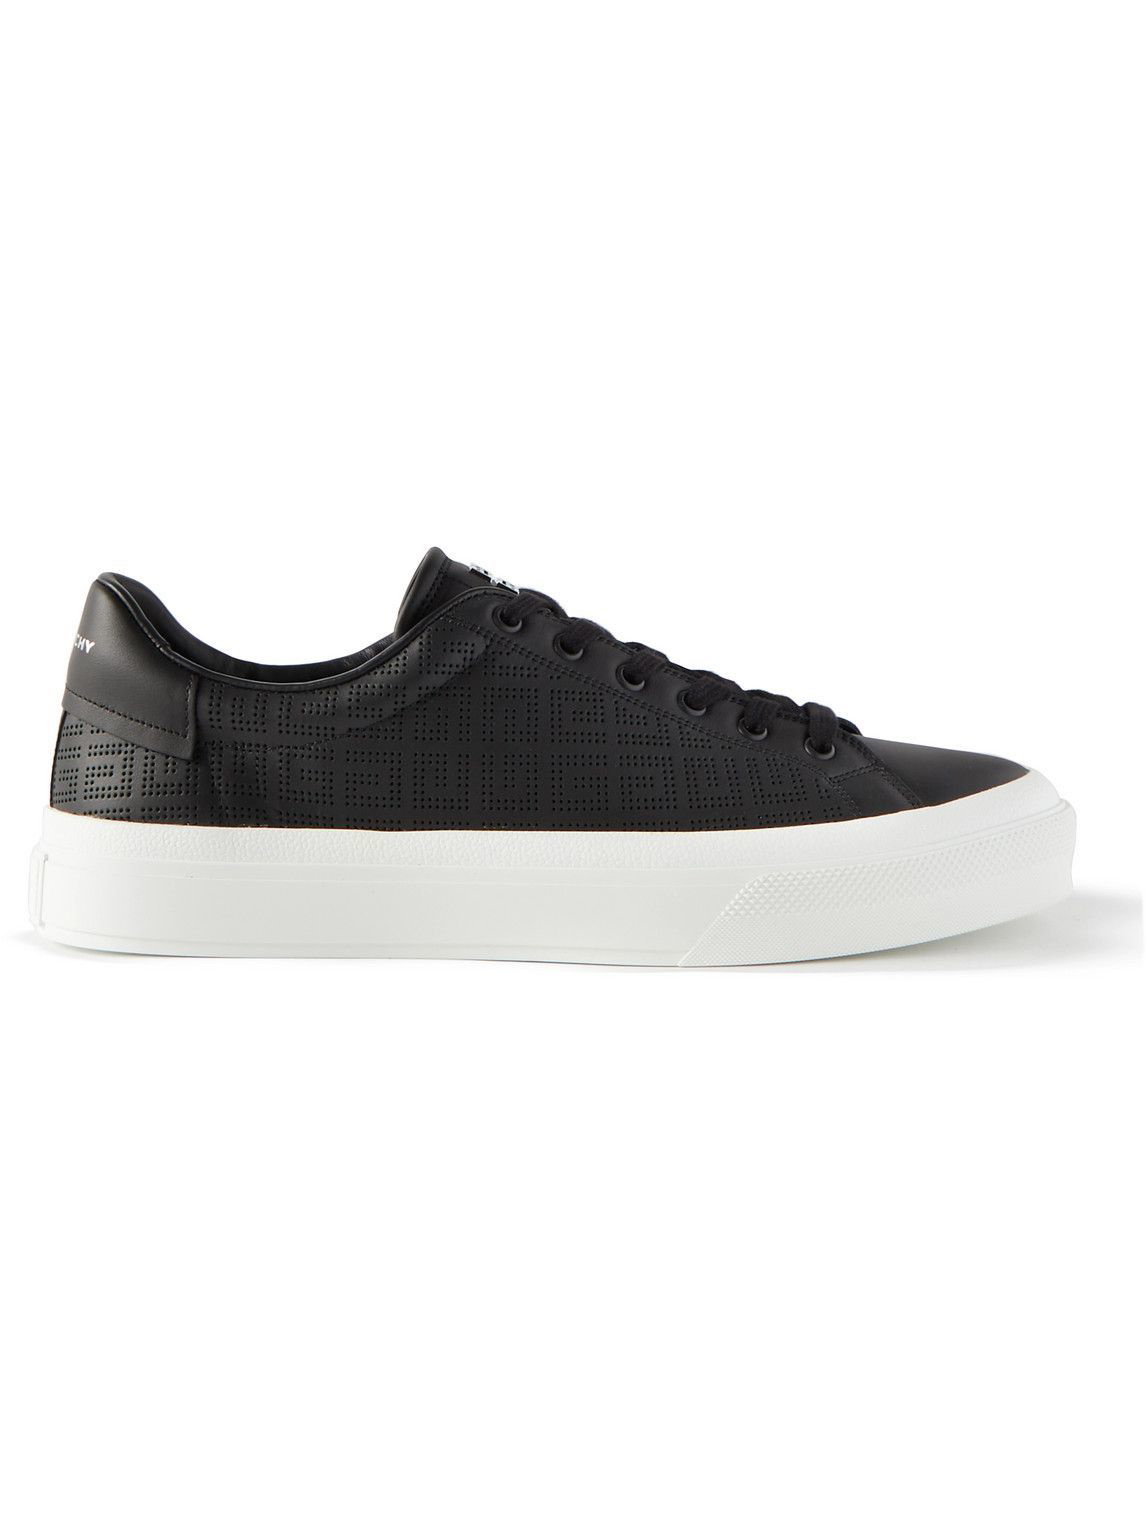 Givenchy - Perforated Leather Sneakers - Black Givenchy